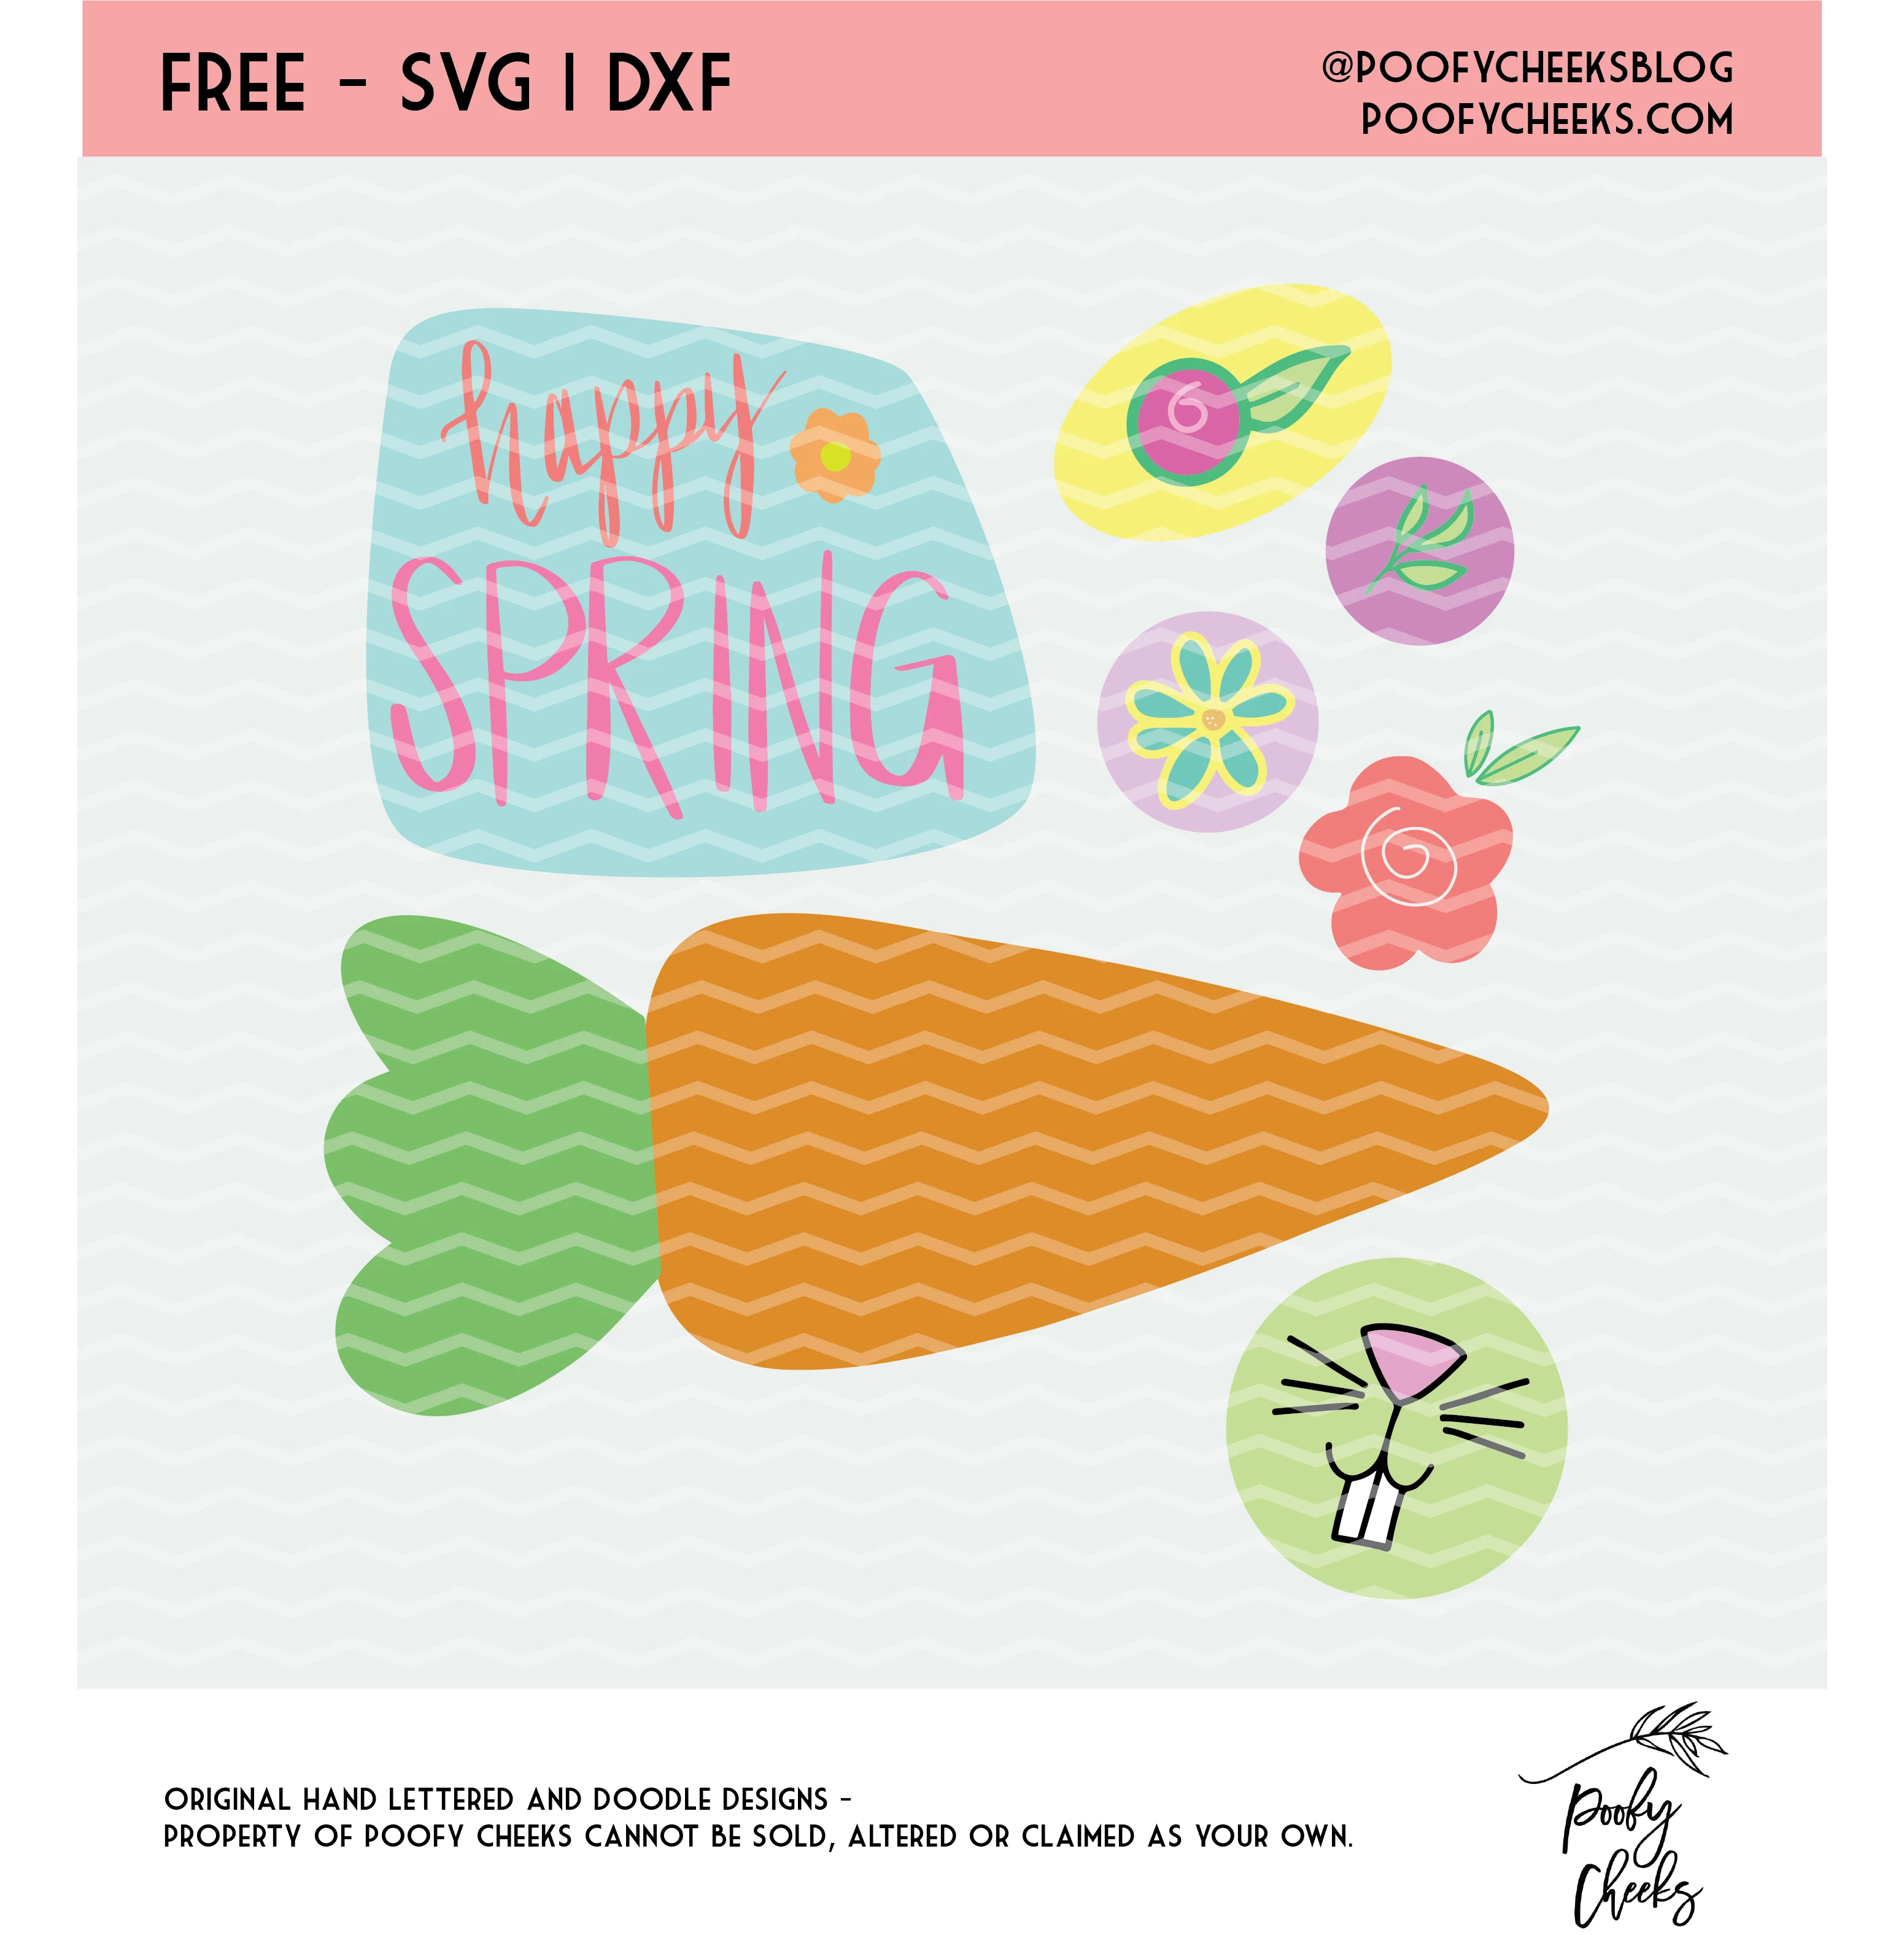 Free Easter Cut files for Silhouette and Cricut cutting machines. Find loads of free cut files on this site!